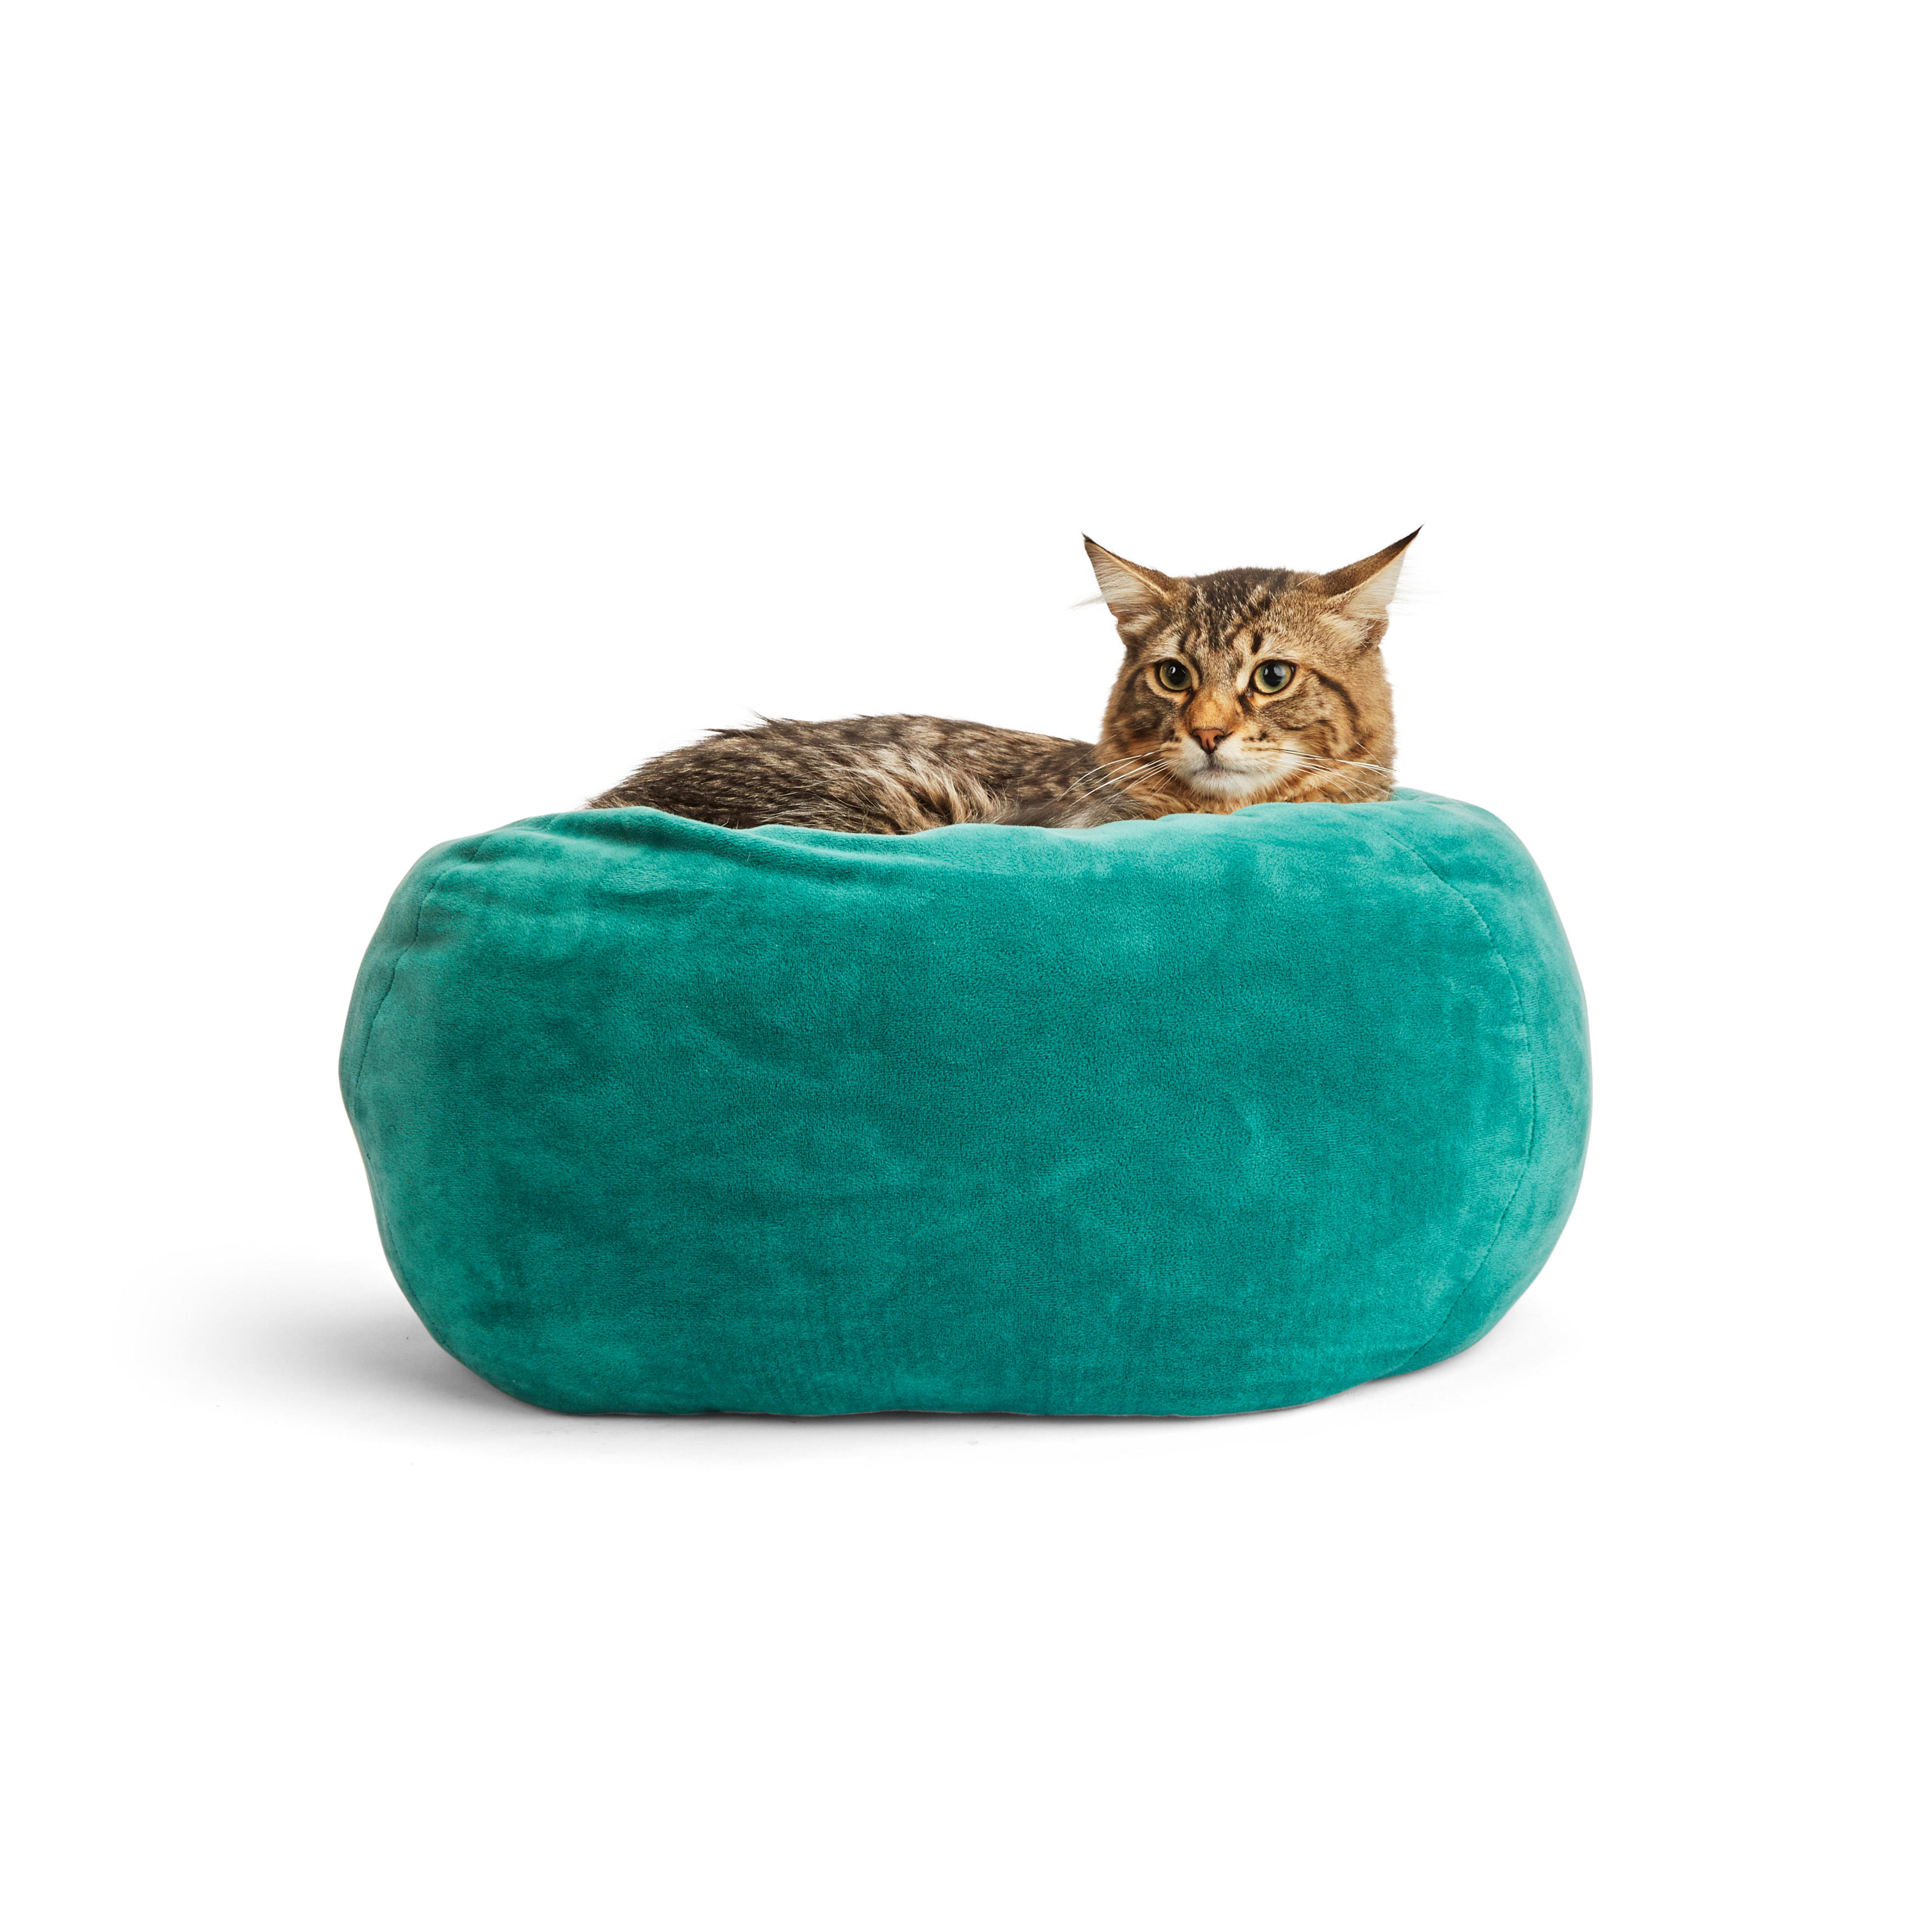 Cute print! Home made sturdy cat beds-machine washable and cats love them